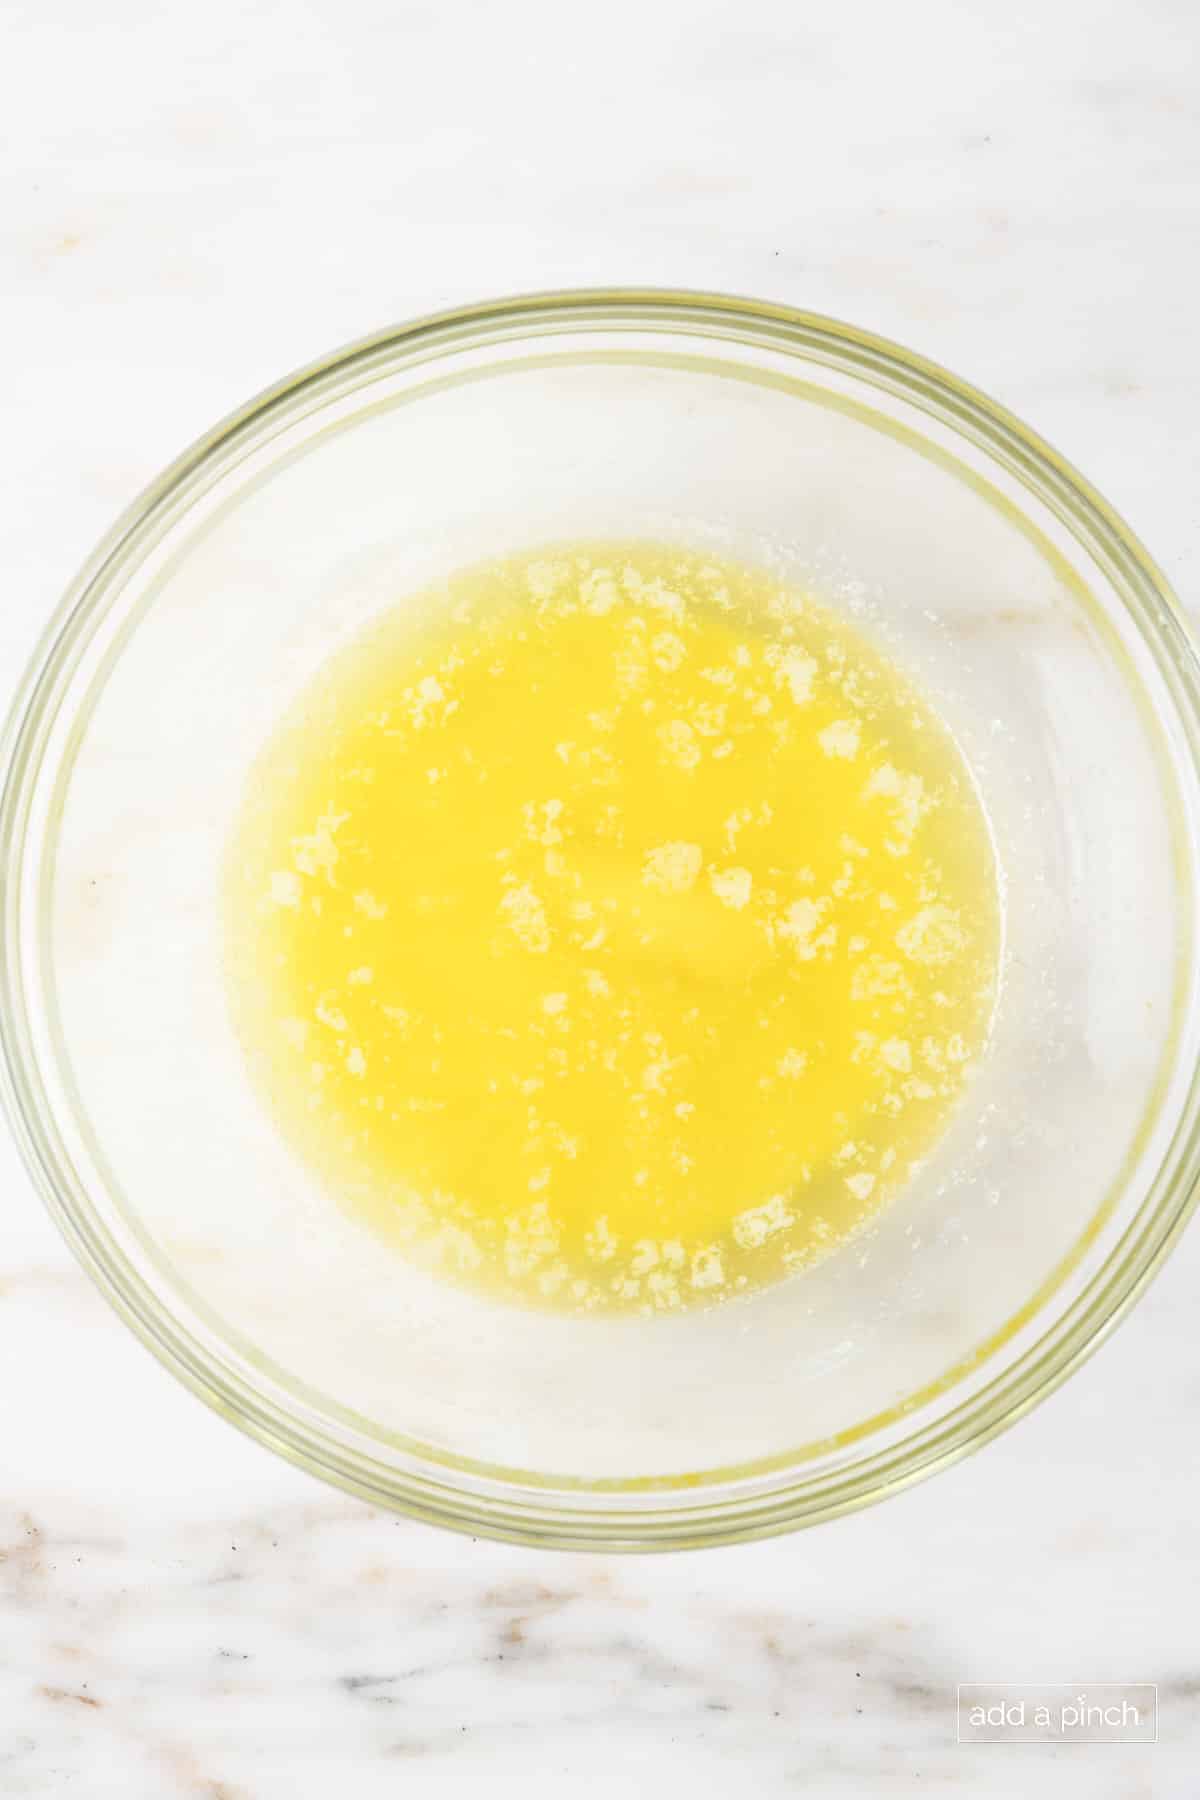 Melted butter in a glass bowl.